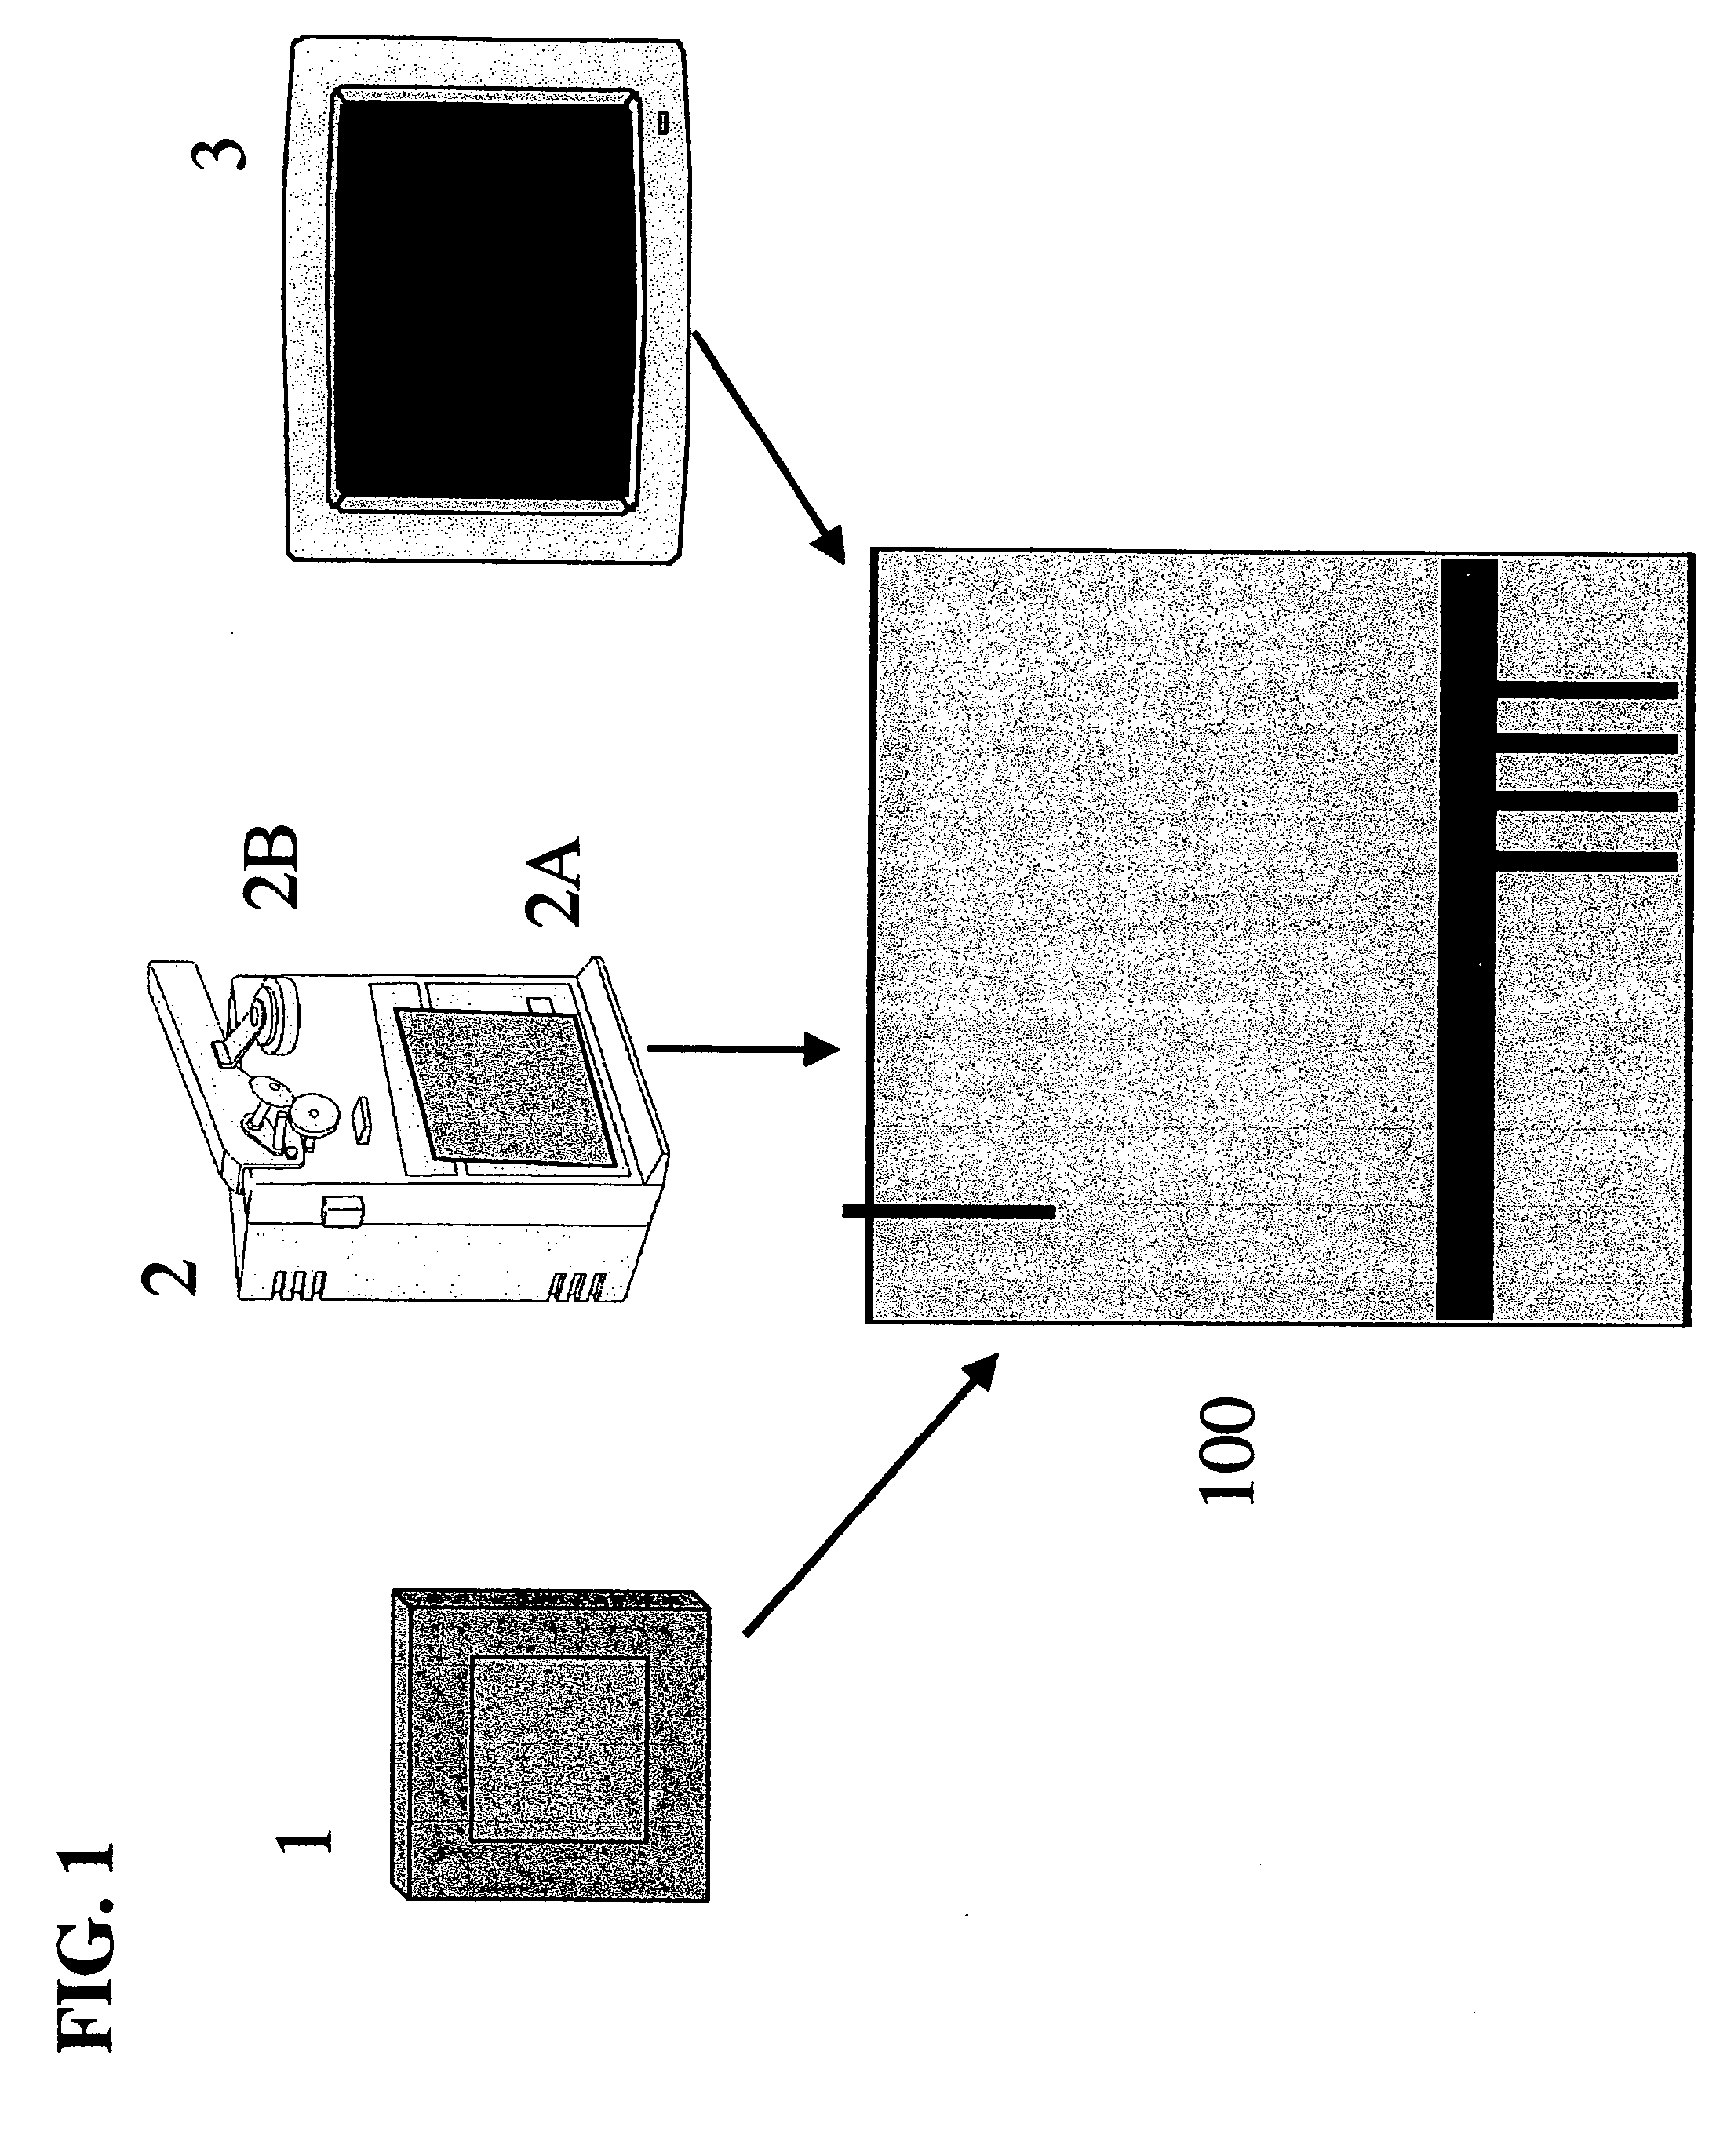 Method, apparatus and processes for real-time interactive online ordering and re-ordering and over the counter purchasing with rebate, saving, and investing processes